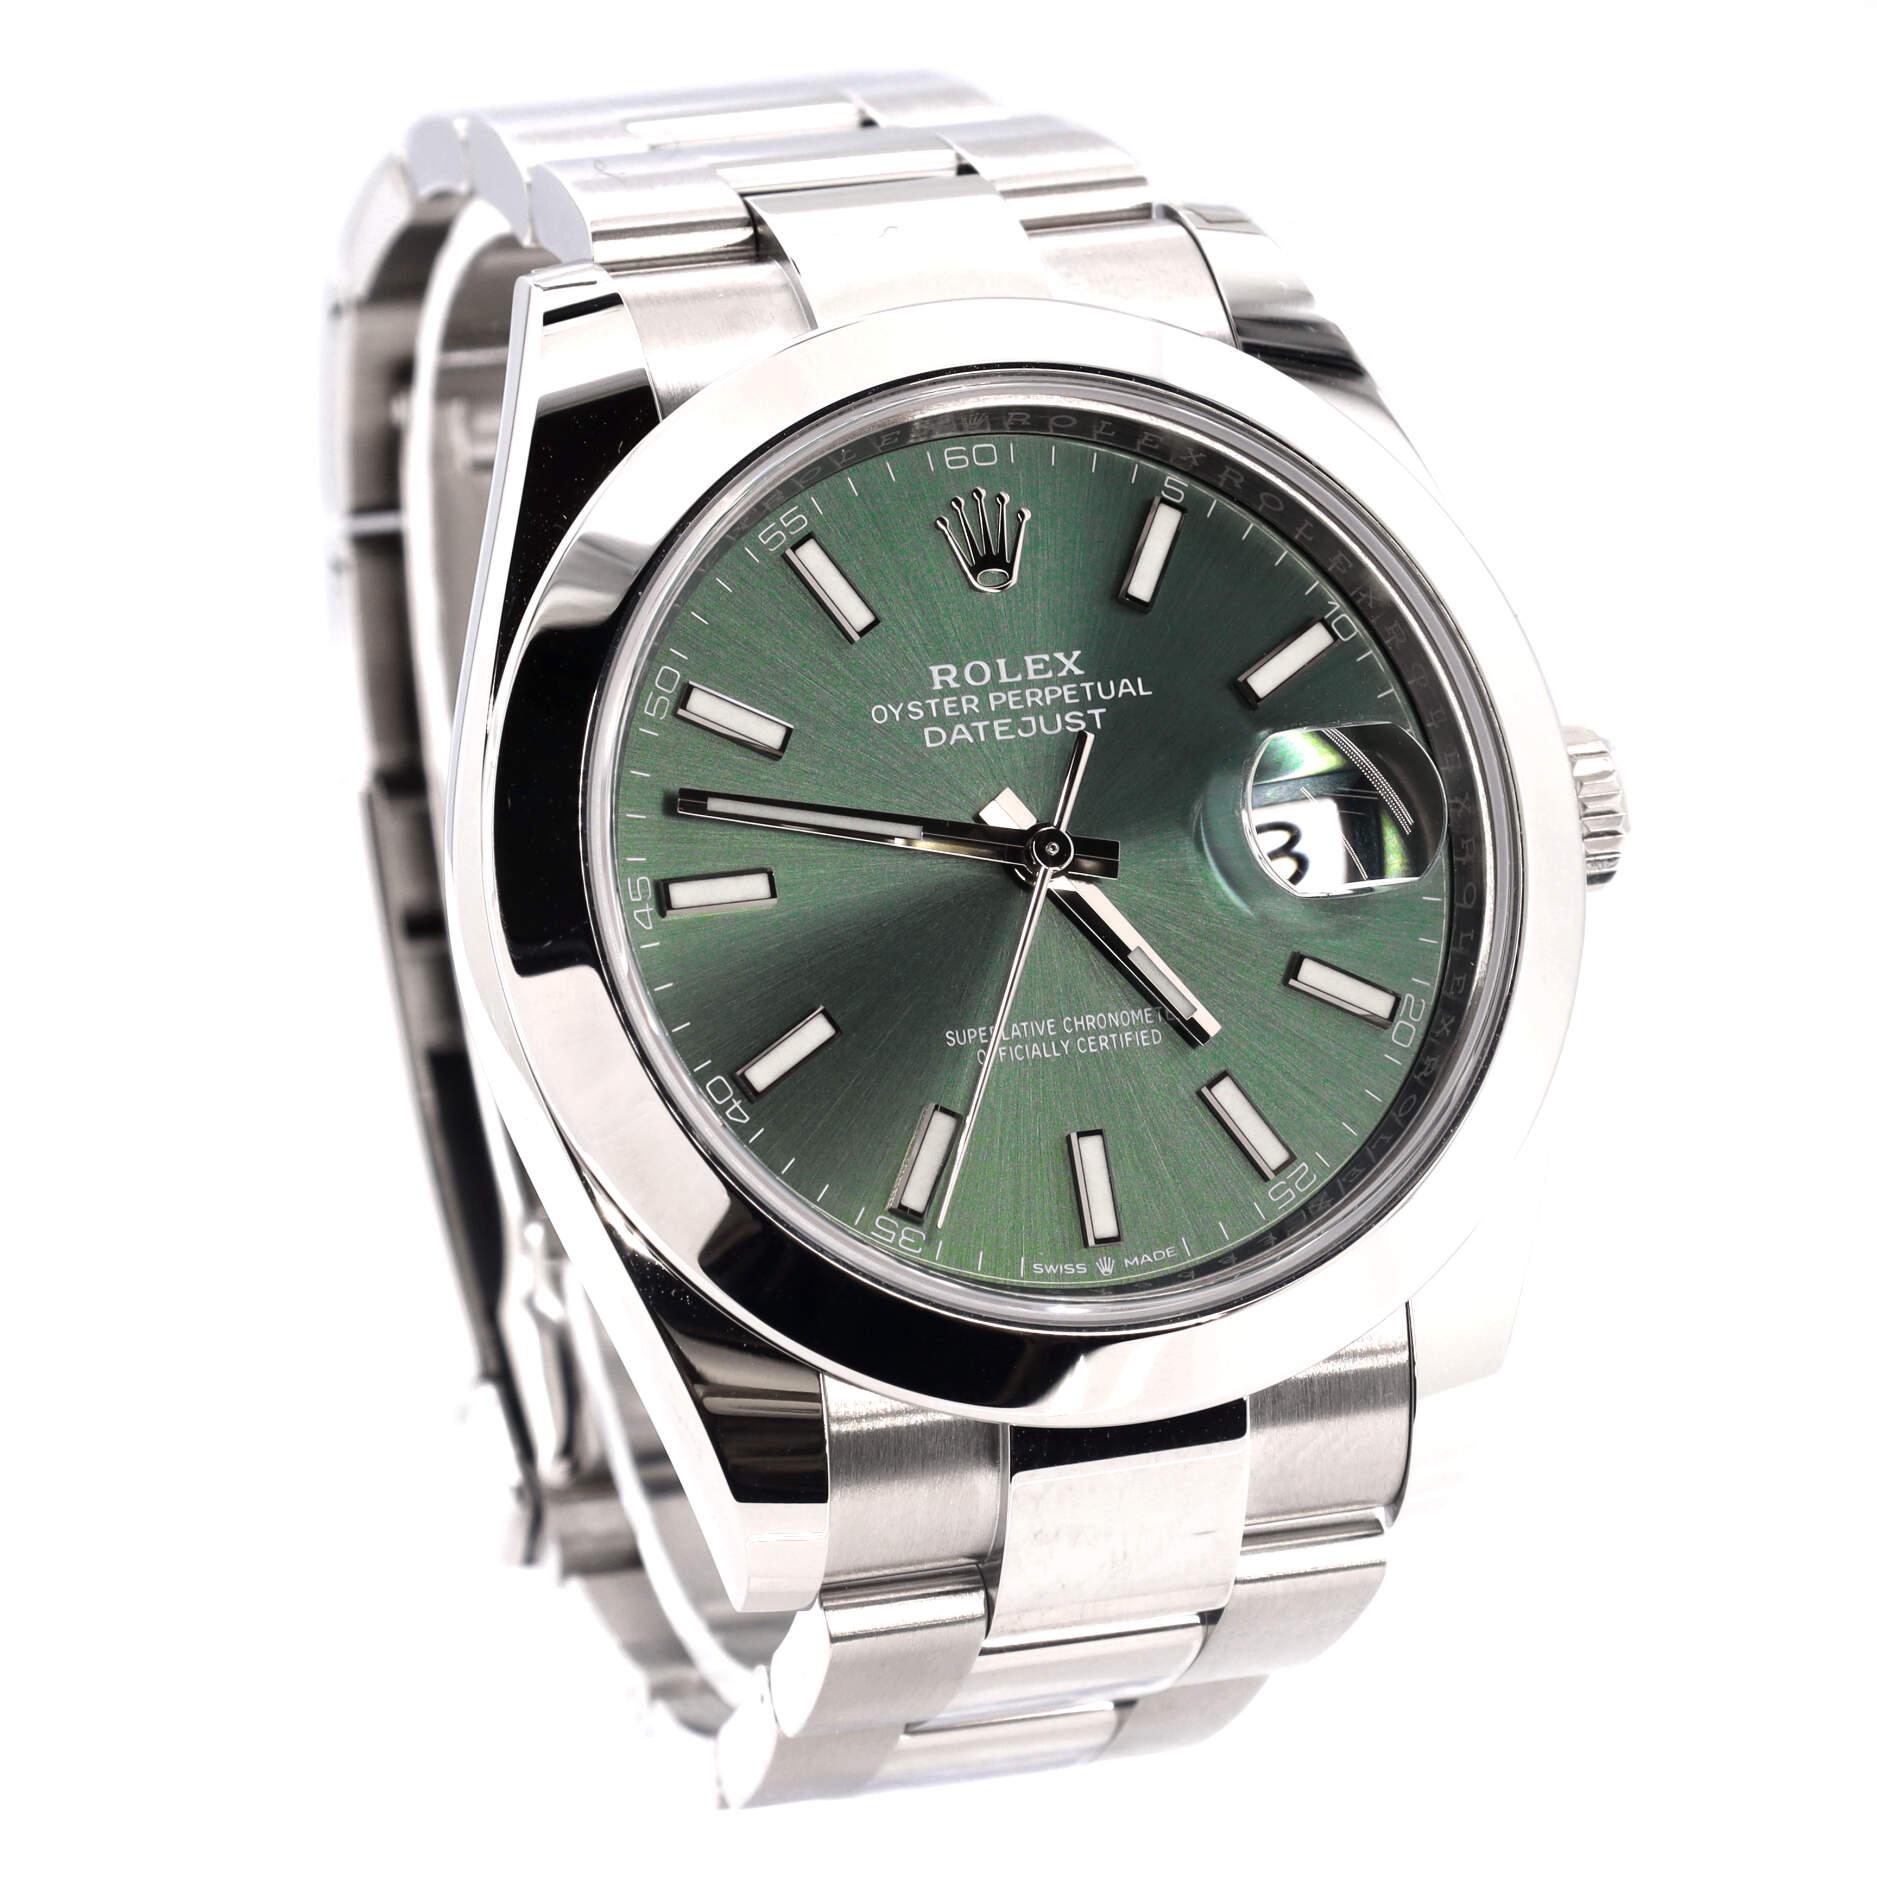 rolex oyster perpetual datejust rhodium dial watch